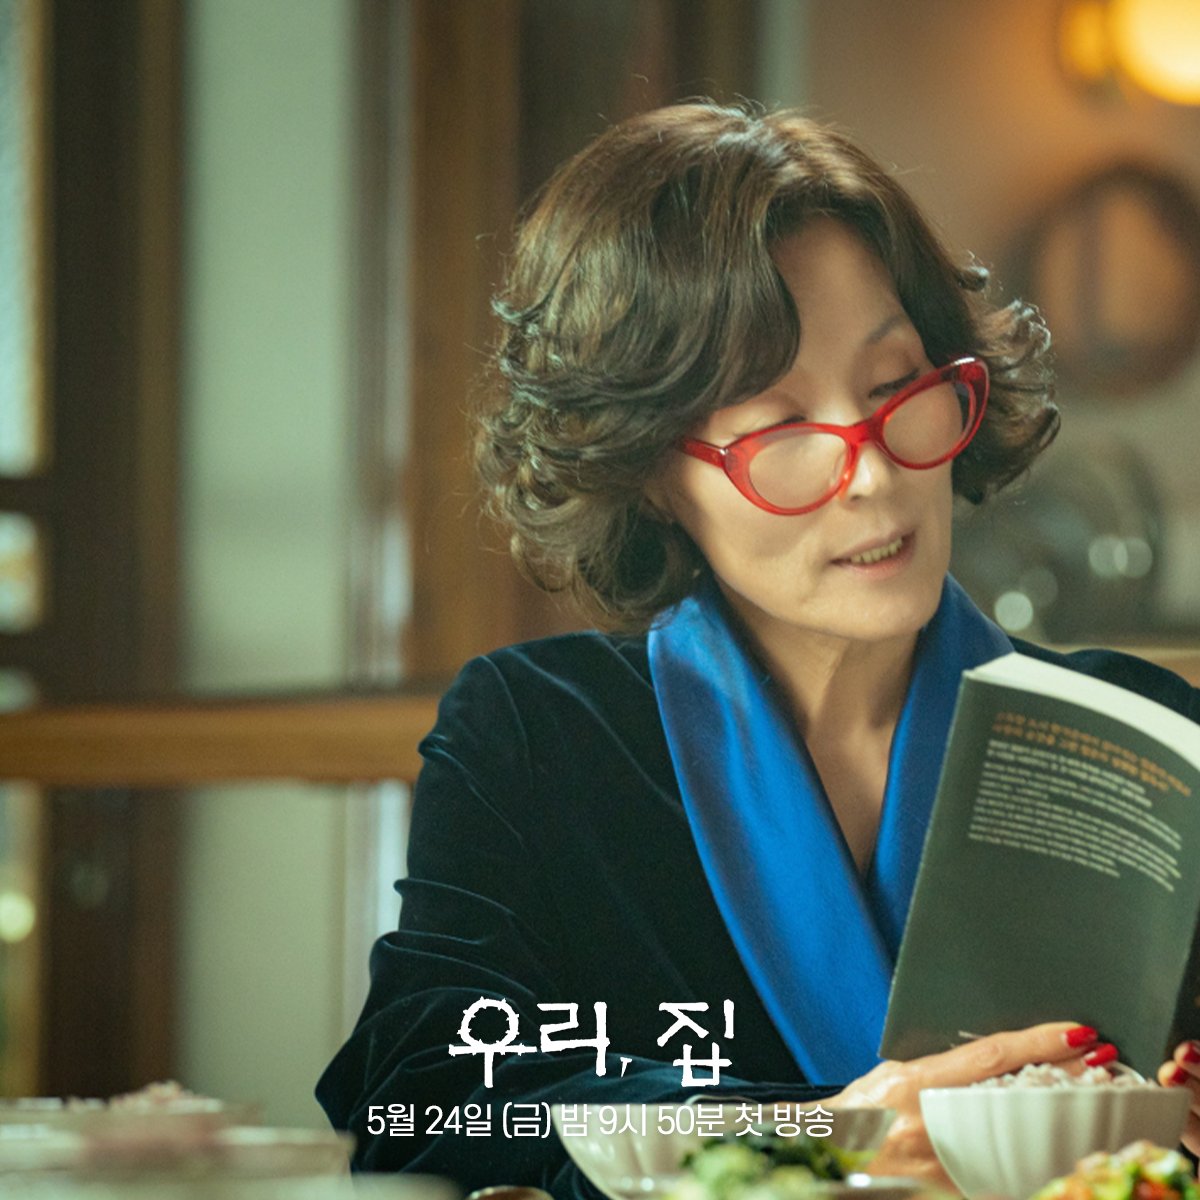 Lee Hye Young Is Kim Hee Sun's Mystery Novel-Writing Mother-In-Law In 